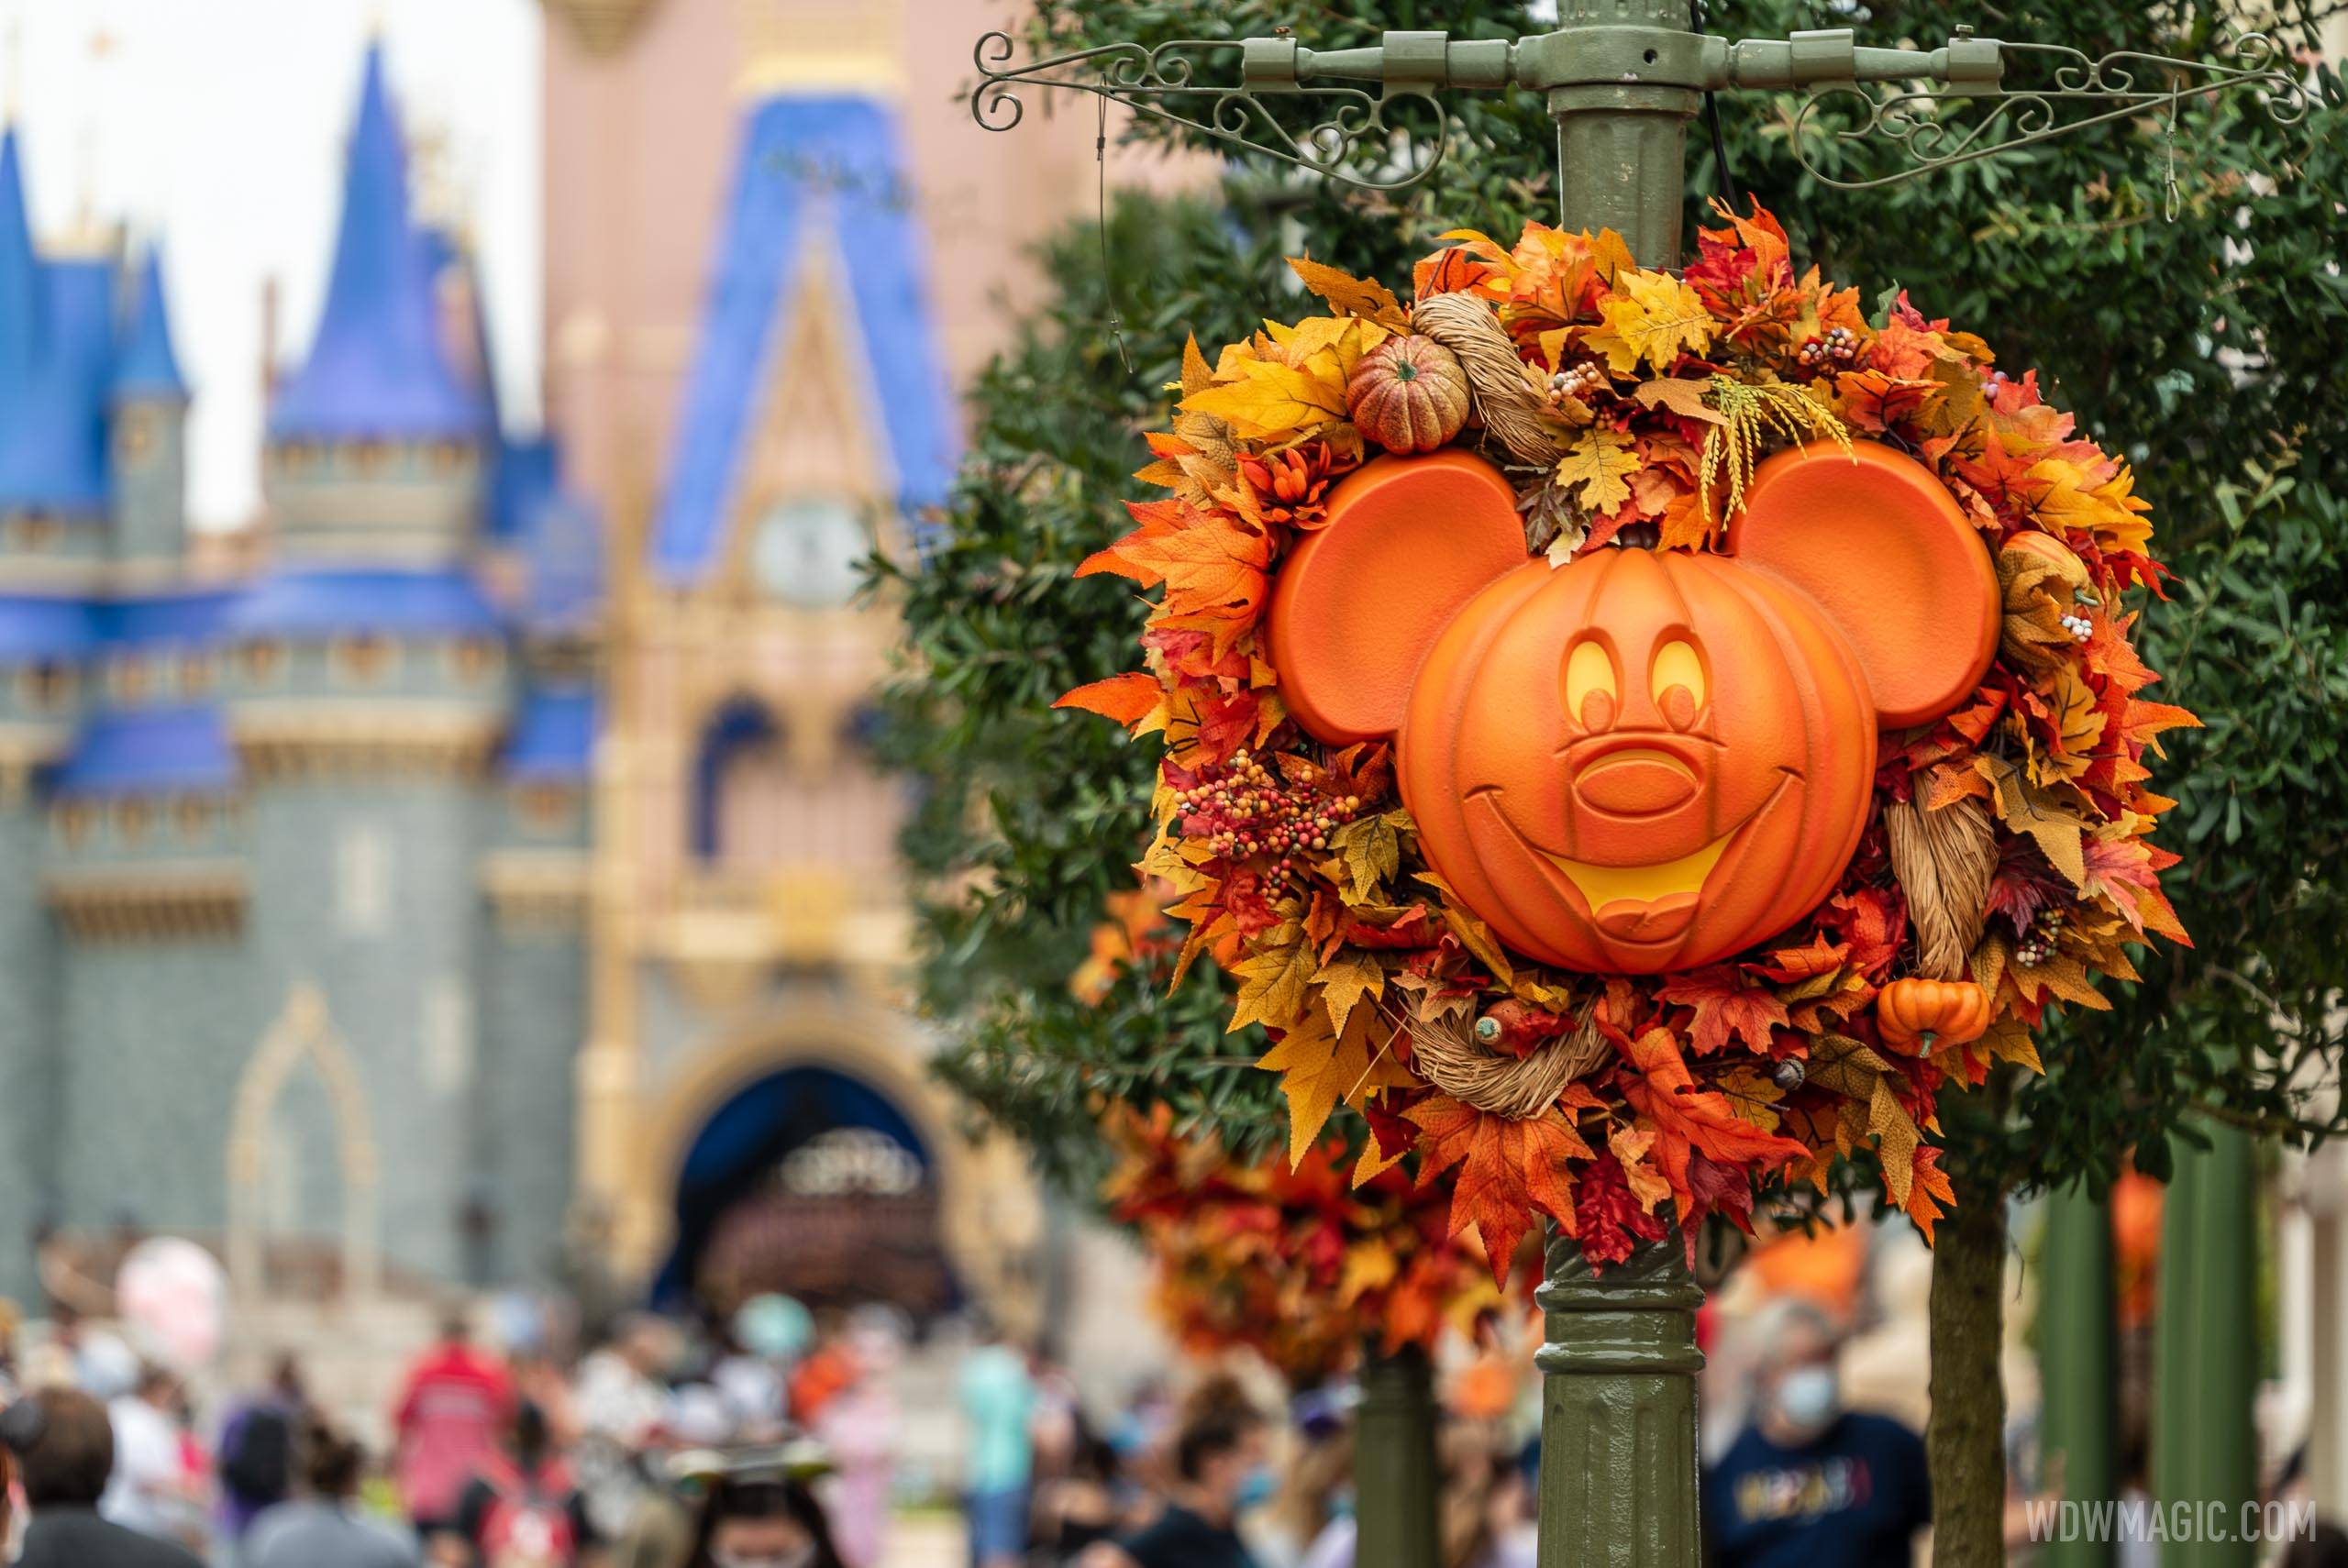 PHOTOS - Halloween season opening day at the Magic Kingdom for 2020